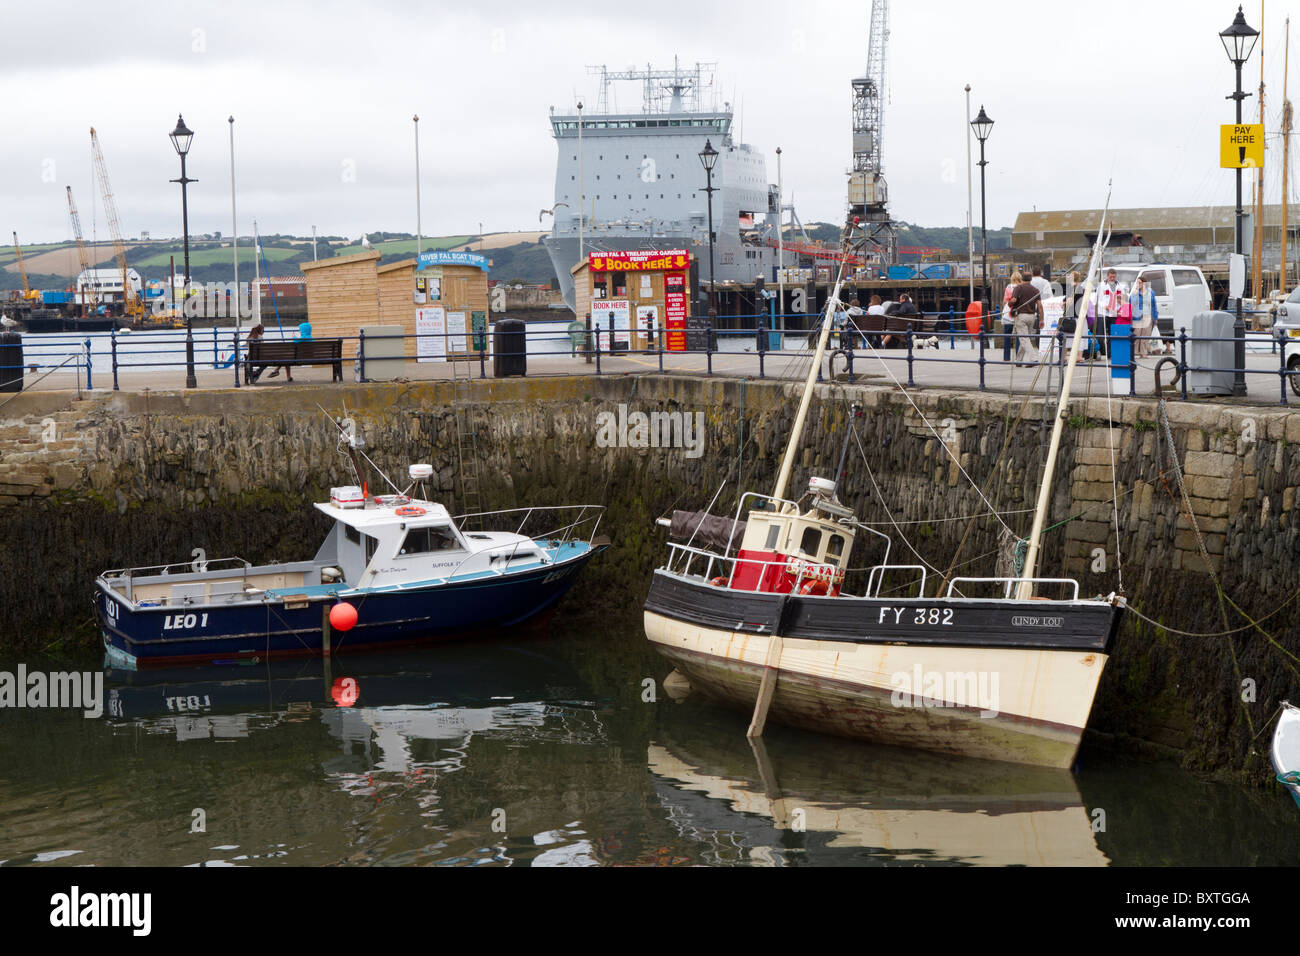 Boote am Pier, Falmouth, UK. Stockfoto